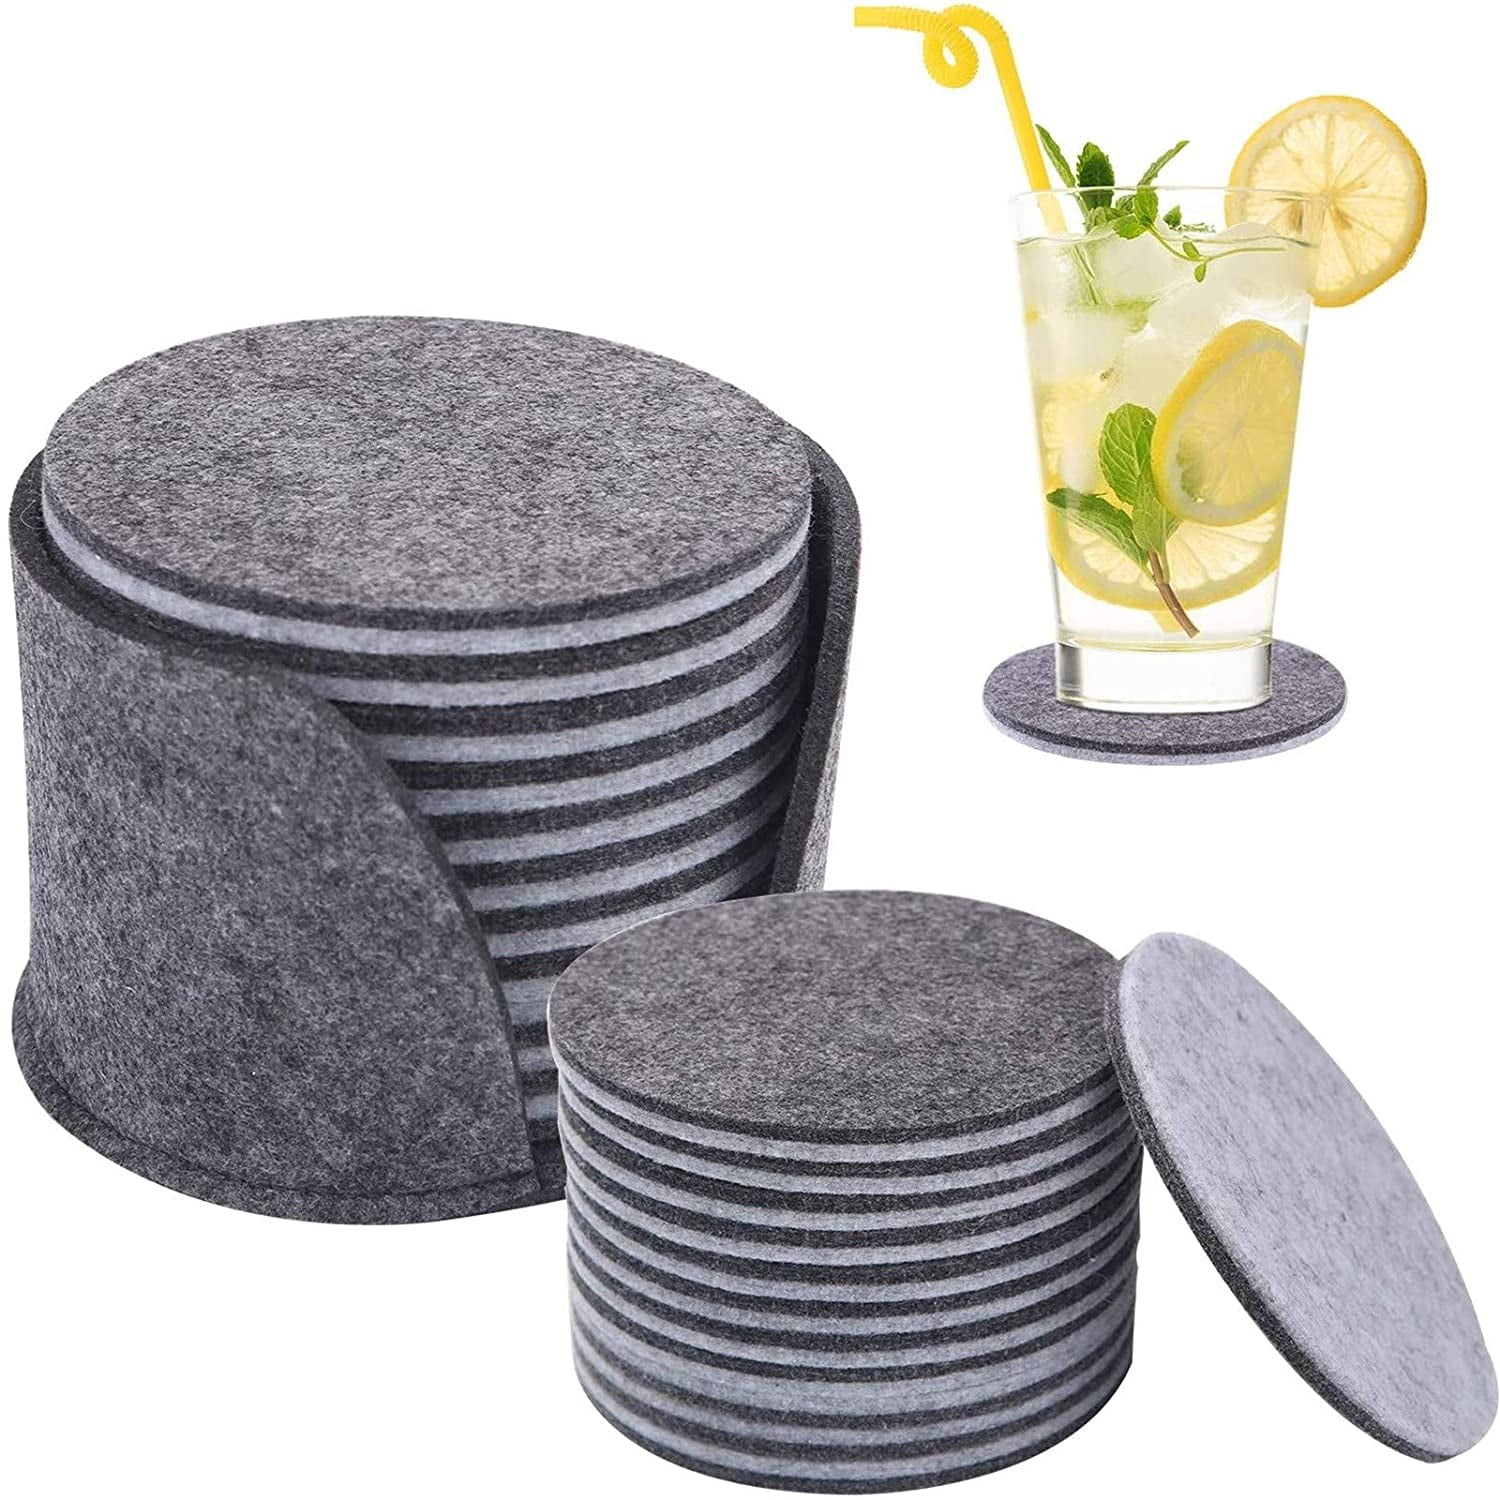 Details about   Round Silicone Coasters Non Slip Cup Mats Pad Office Coffee Tea Mug Coaster Mats 